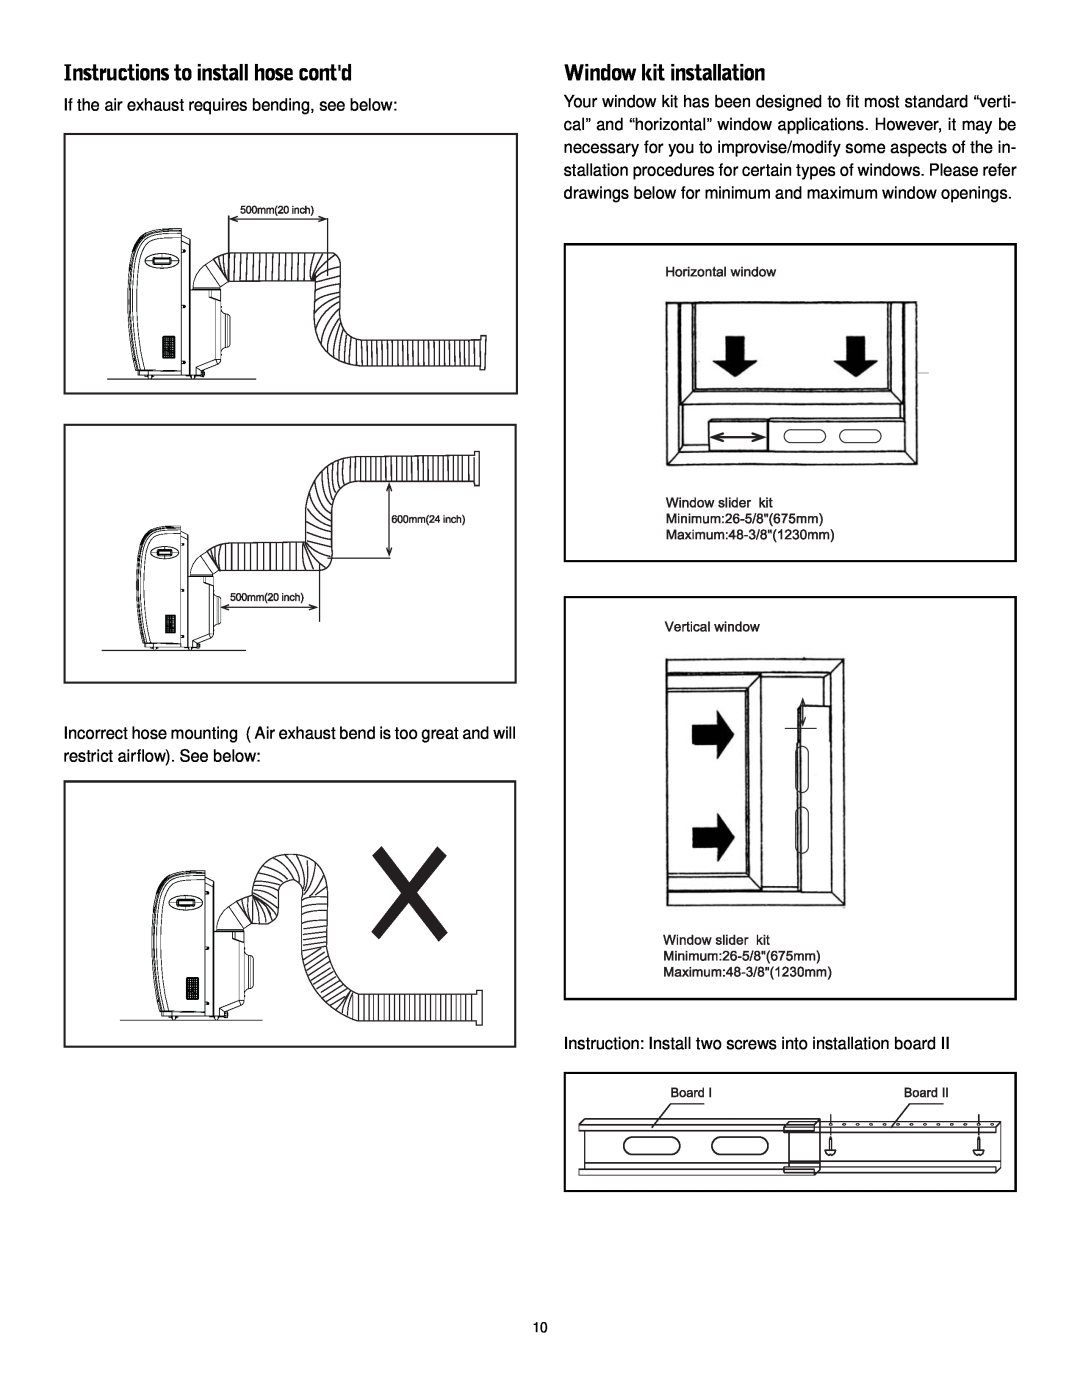 Friedrich P-09 operation manual Instructions to install hose contd, Window kit installation 